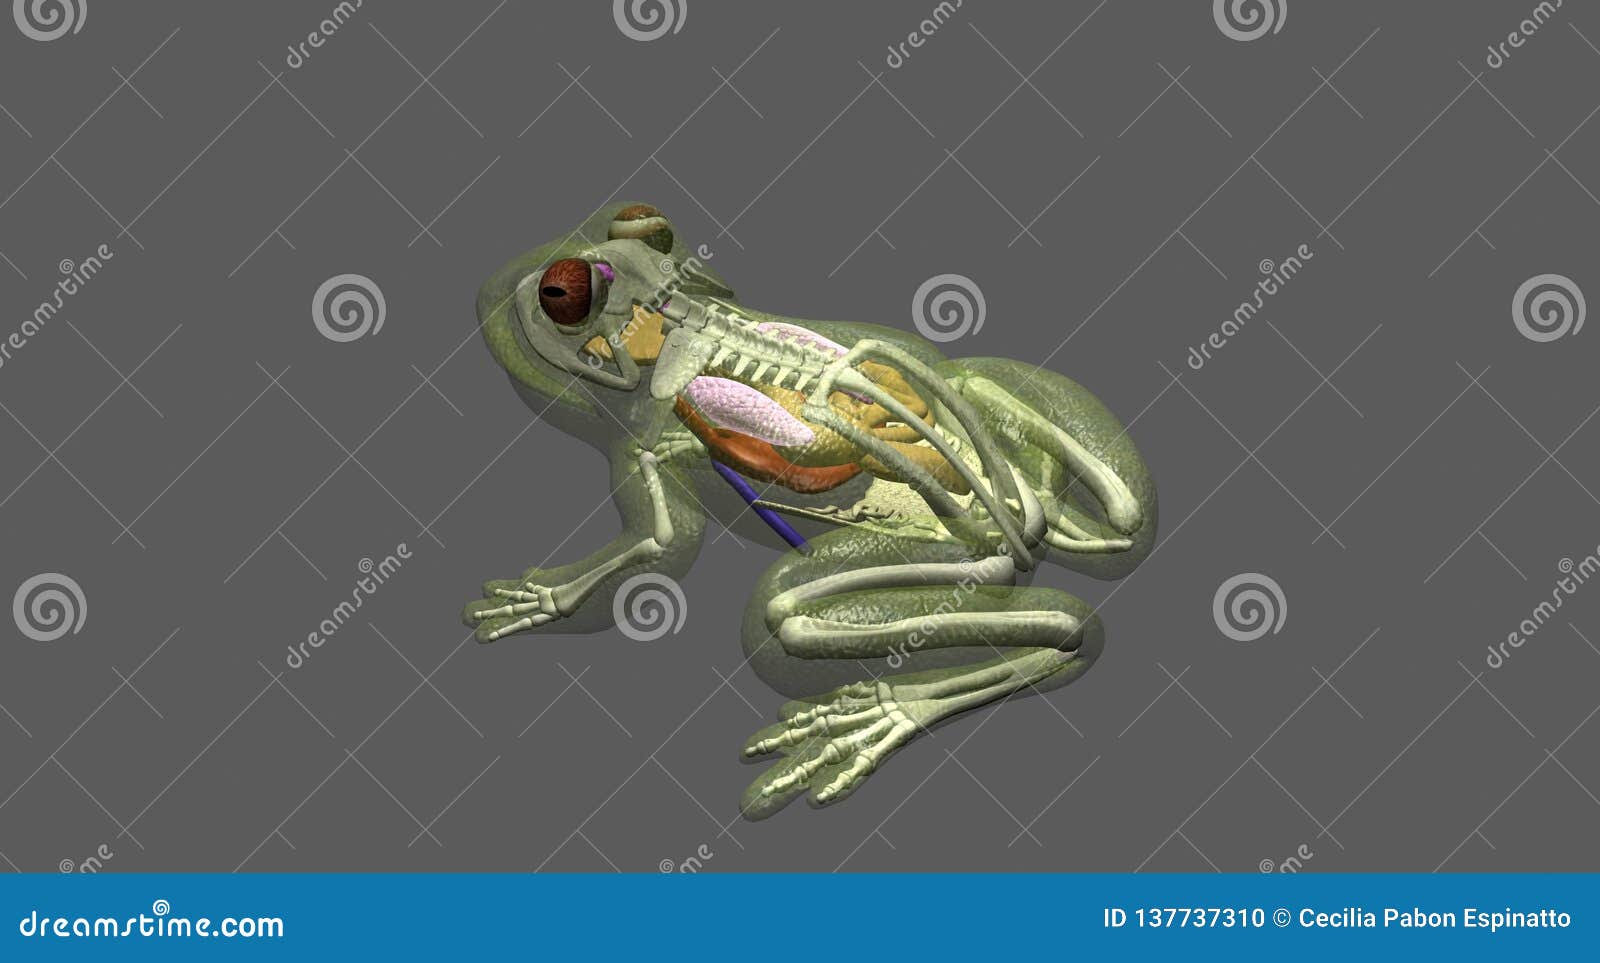 frog anatomy top-side view